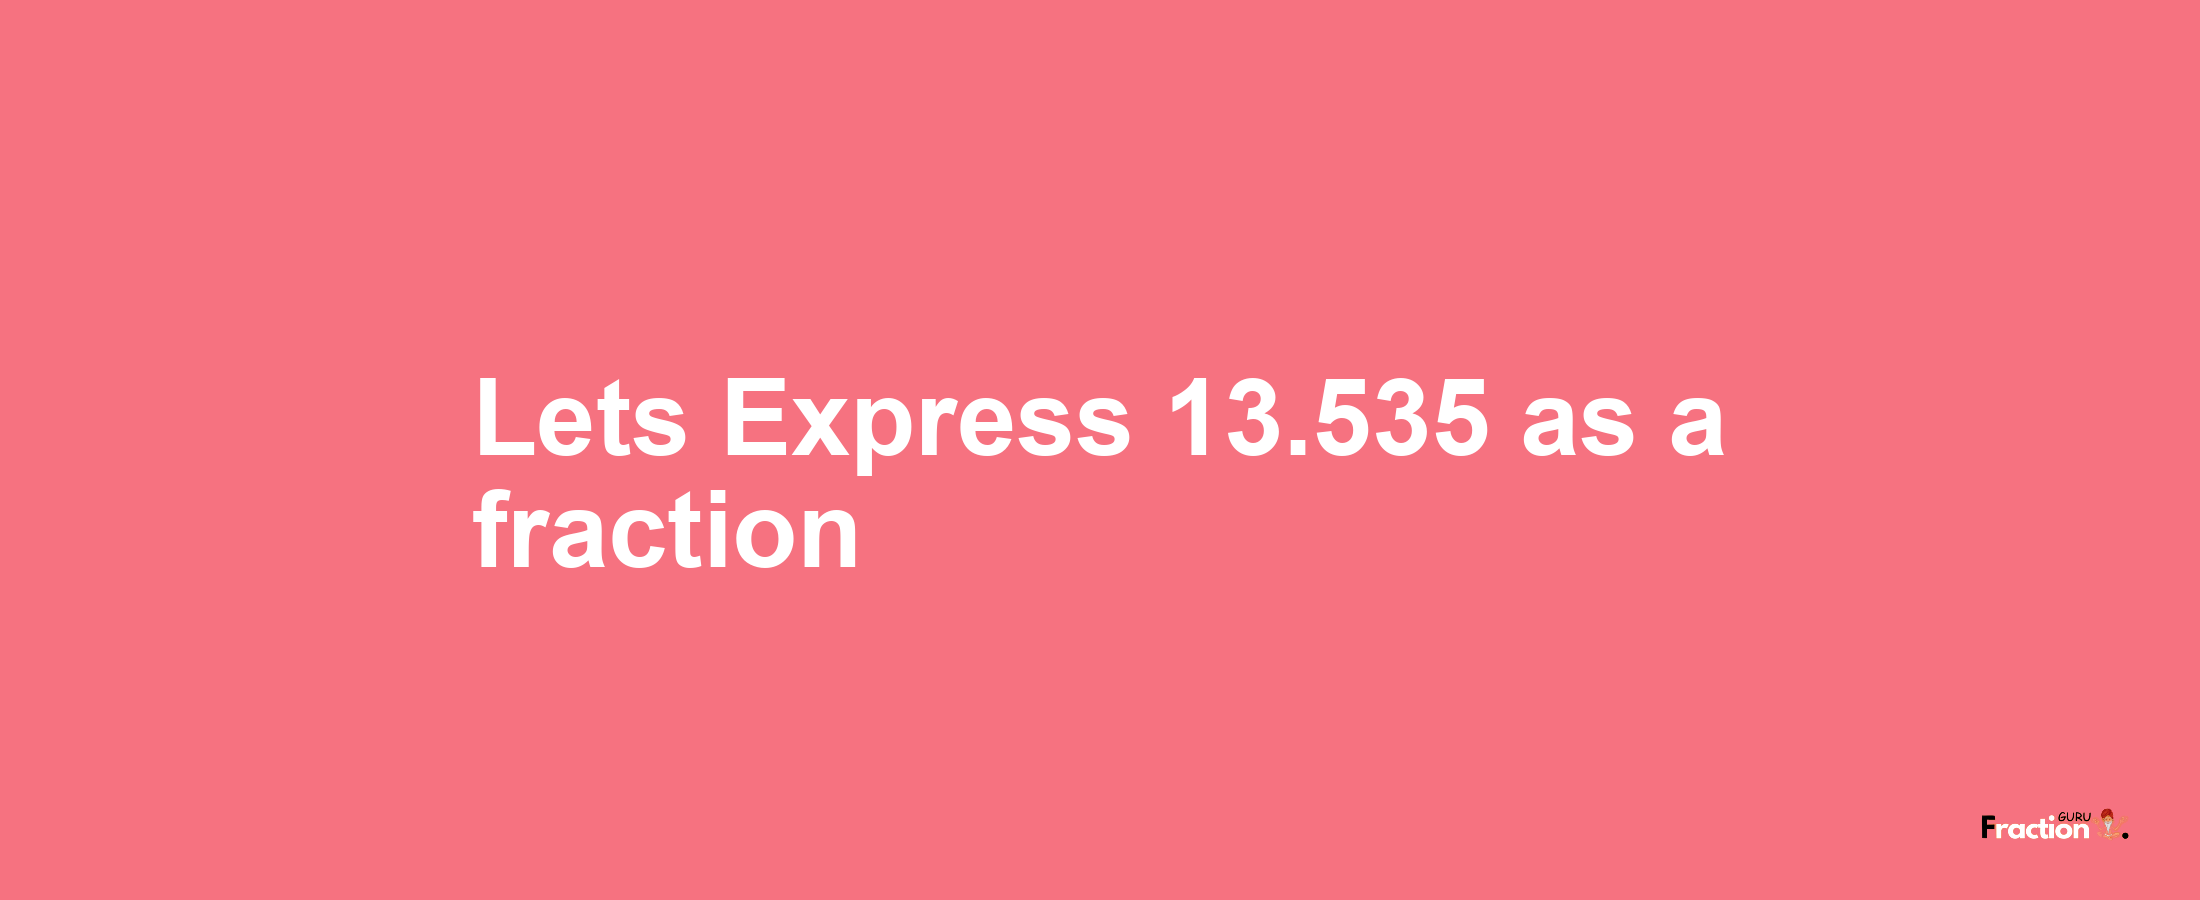 Lets Express 13.535 as afraction